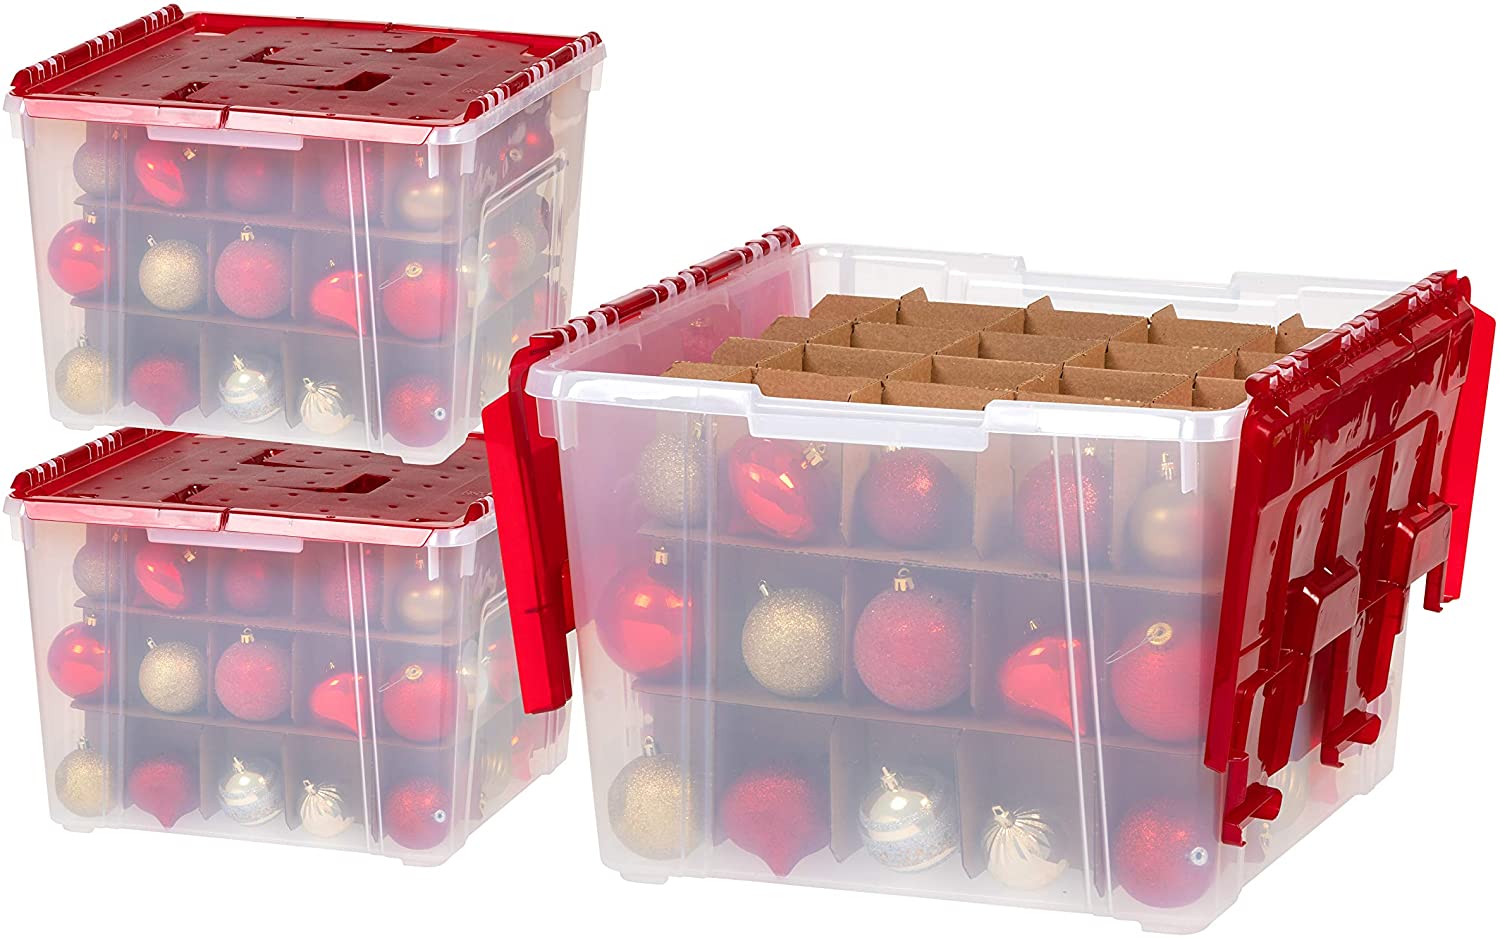 IRIS USA WL60 Holiday Ornament Storage Box with dividers, 3 Count